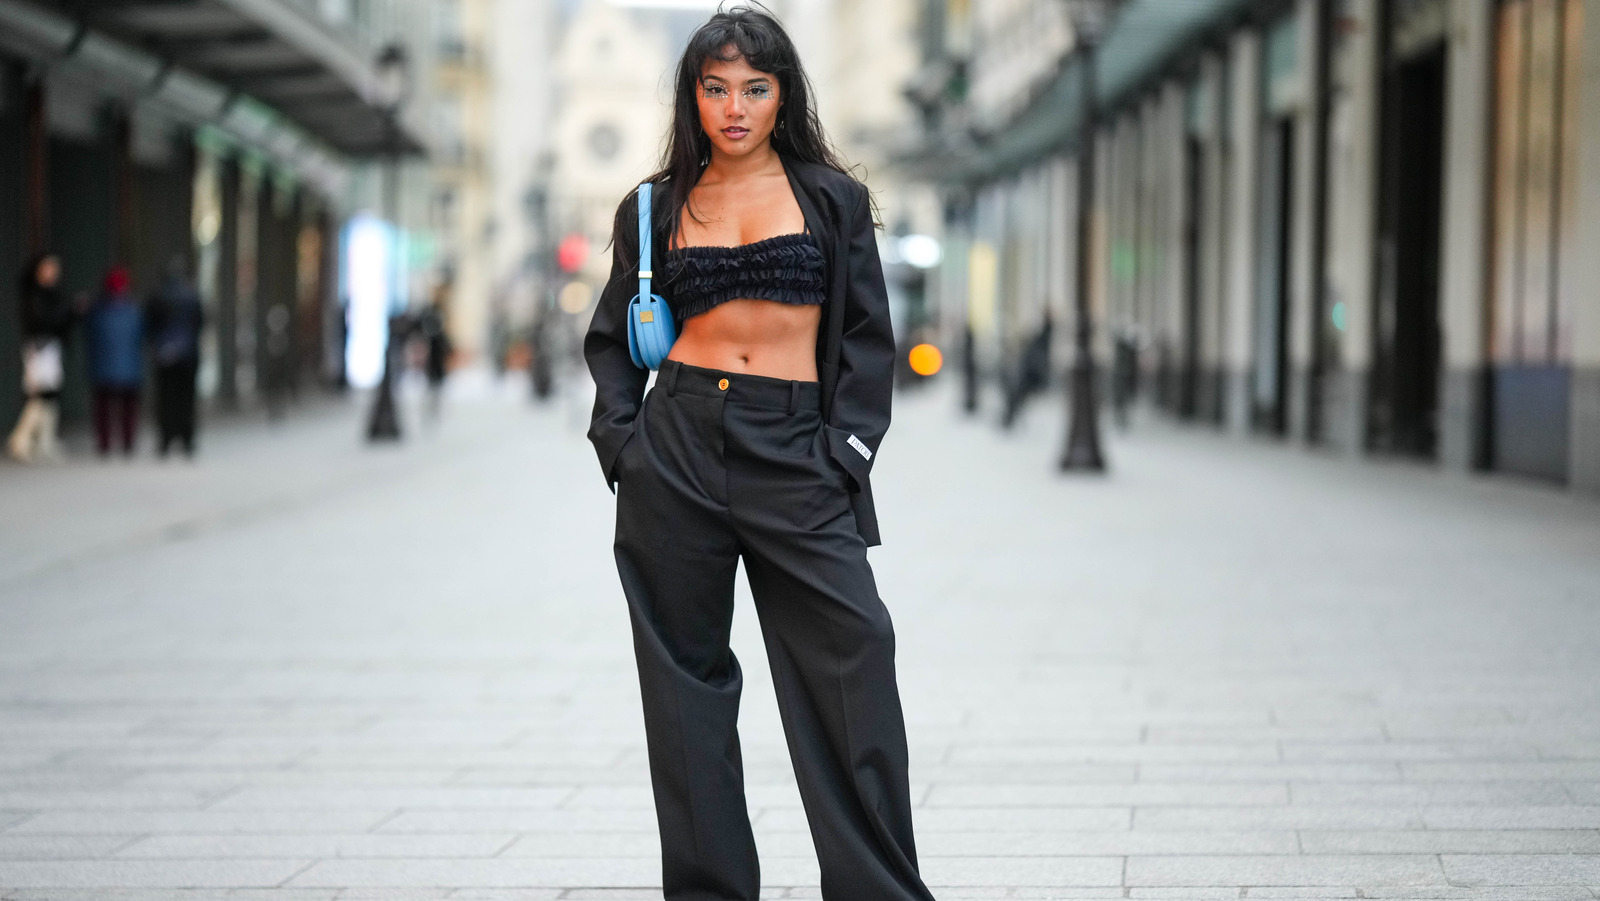 Pantsuits & Bra Tops Are The Proportion-Skewing Trend We Can't Get Enough Of